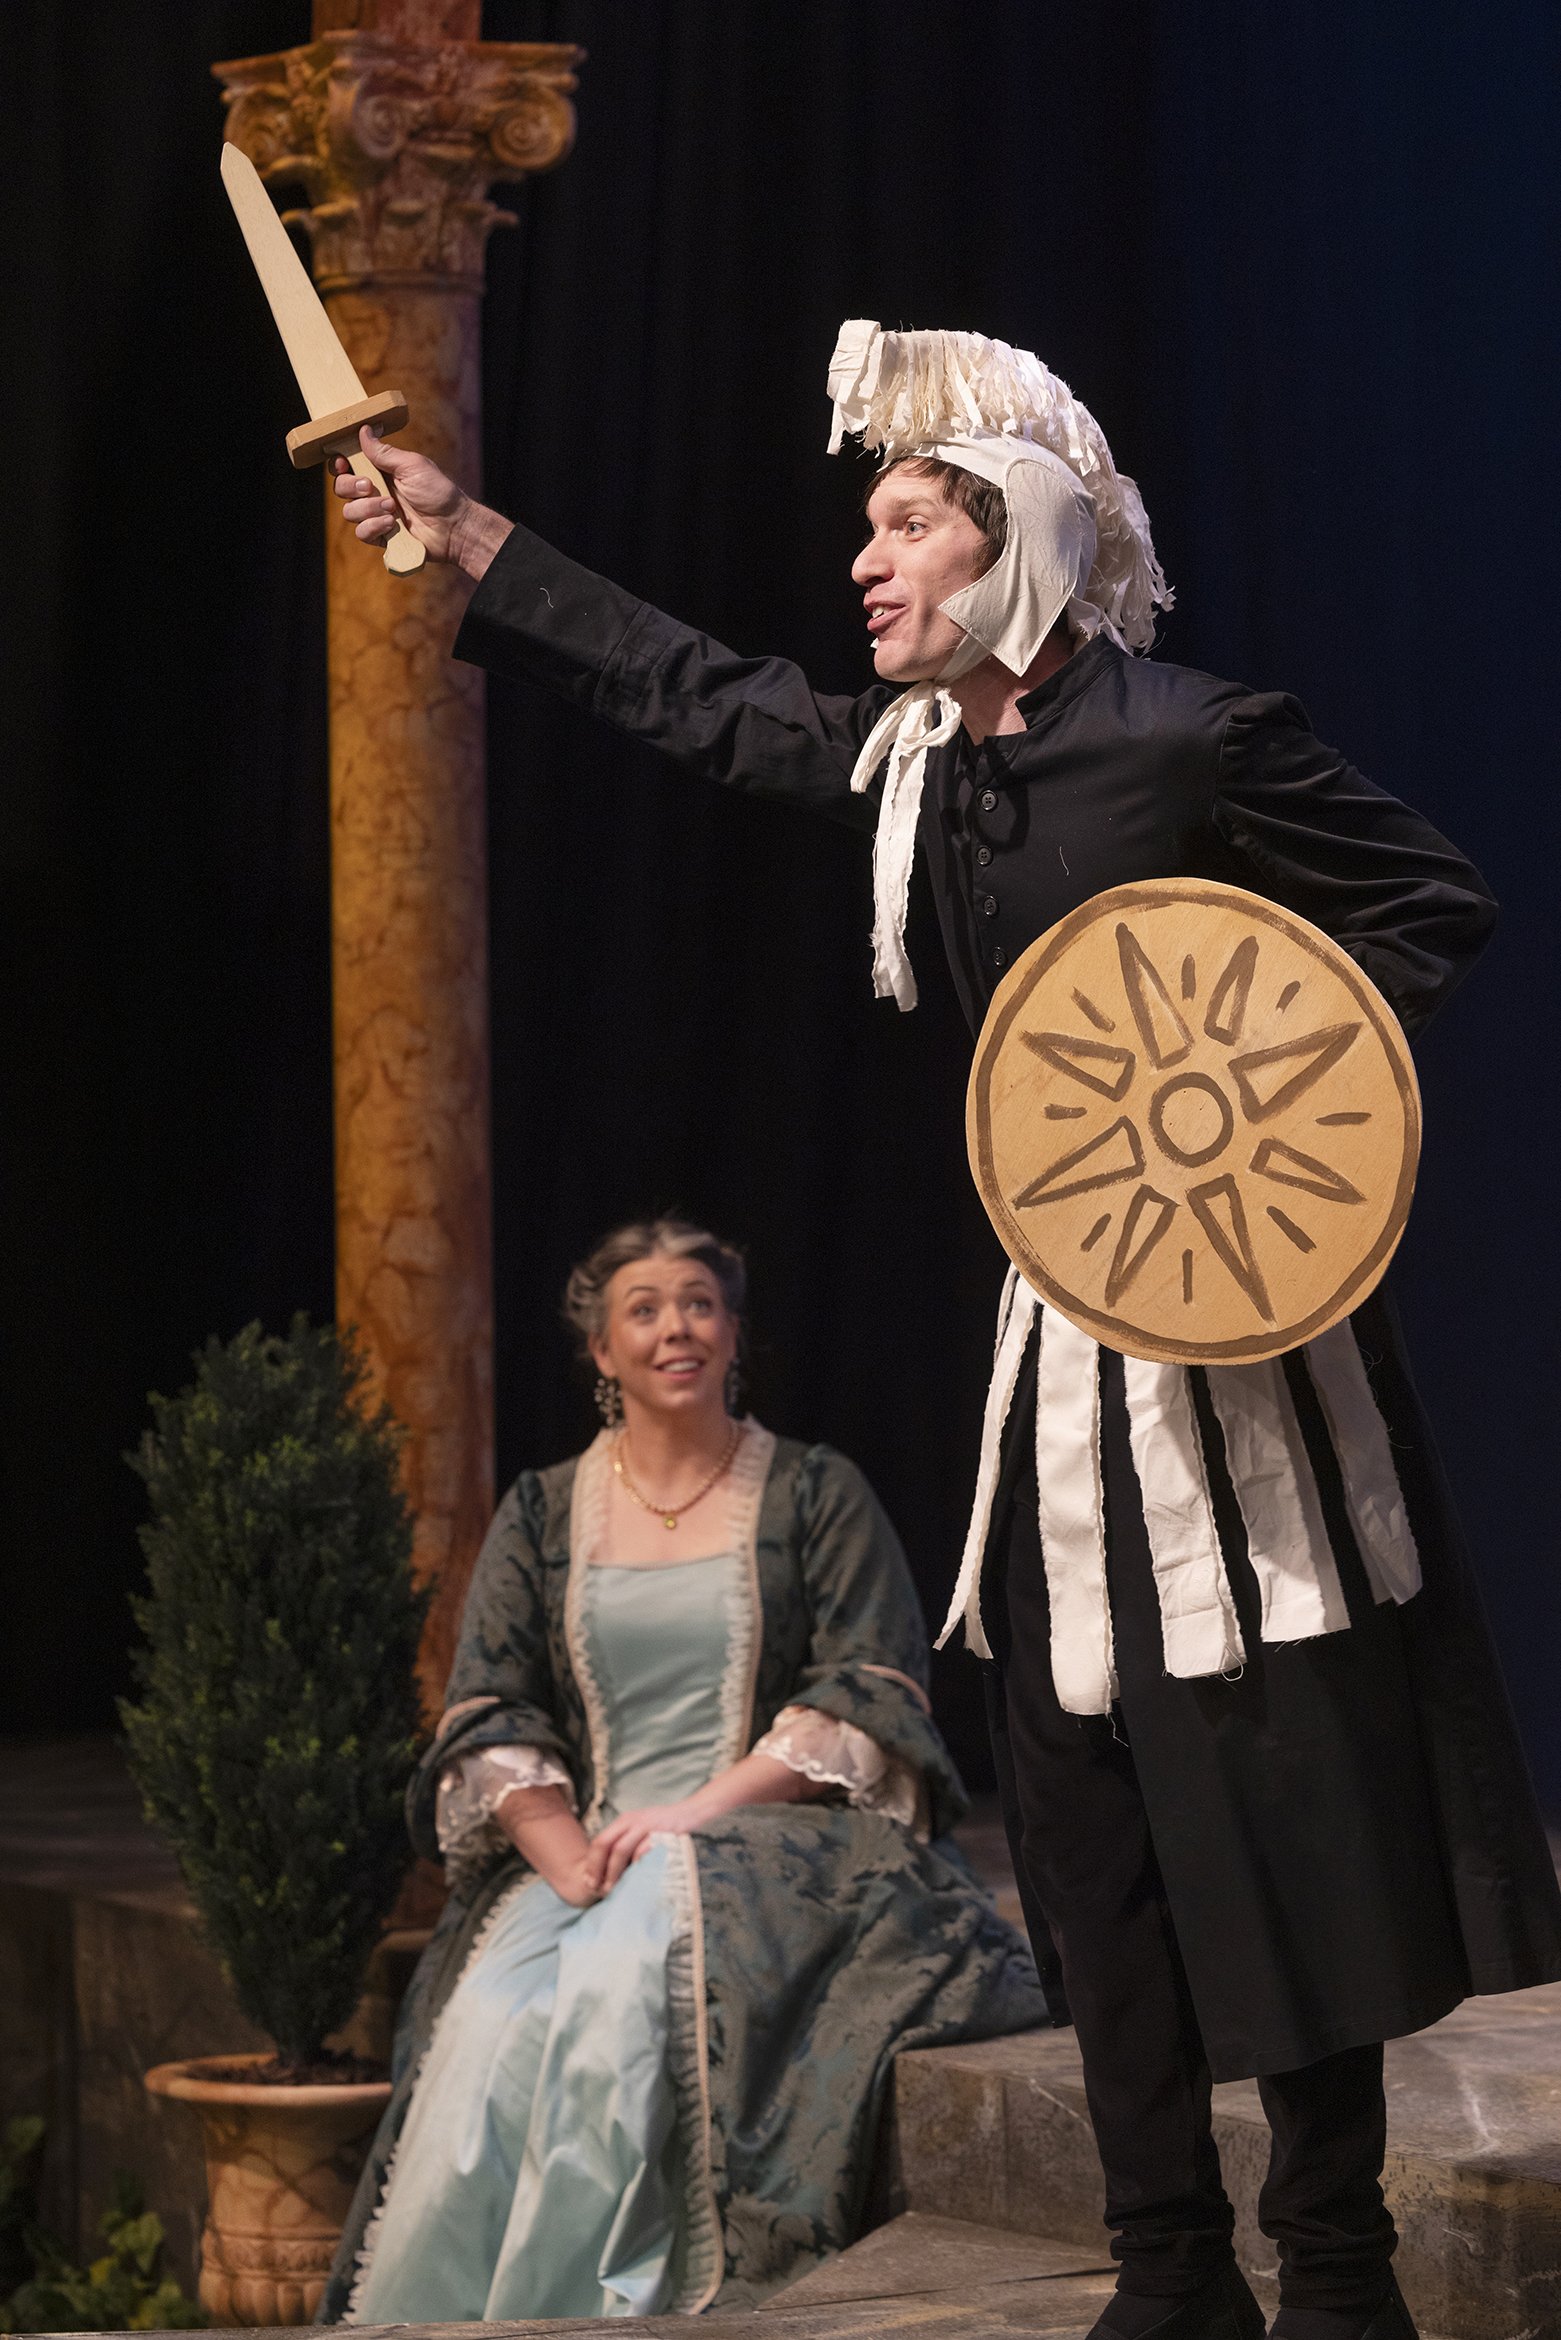 Chelsea Bowdren as Maria and Christopher Pankratz as Sir Nathaniel (as Alexander the Great). Photo by Tim Fuller.